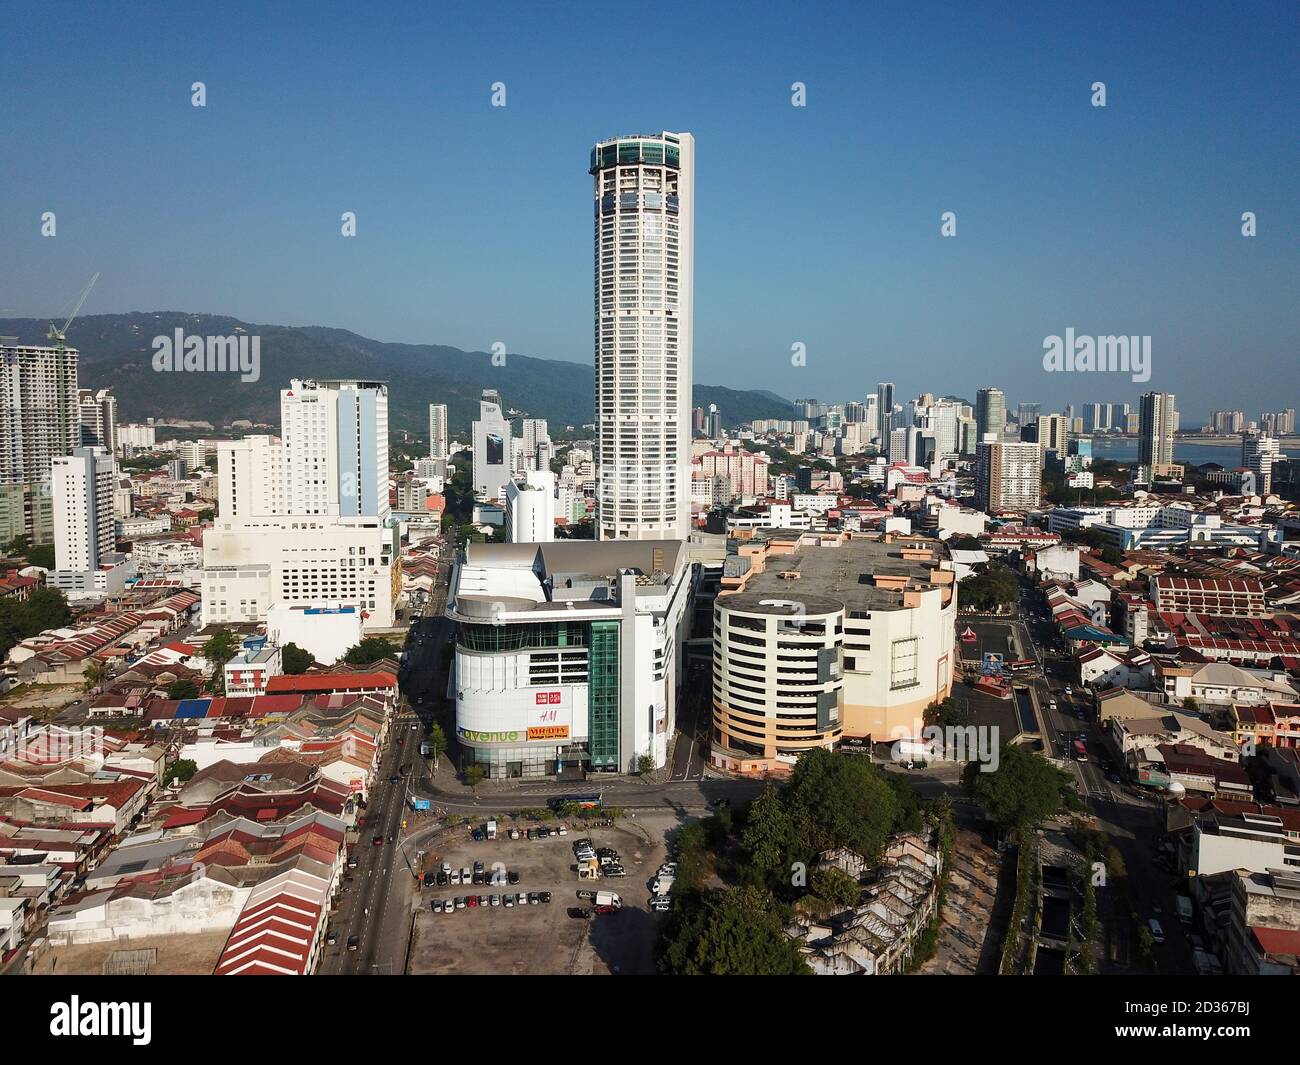 Georgetown, Penang/Malaysia - Feb 29 2020: KOMTAR and 1st Avenue, Prangin Mall in blue sunny day. Stock Photo